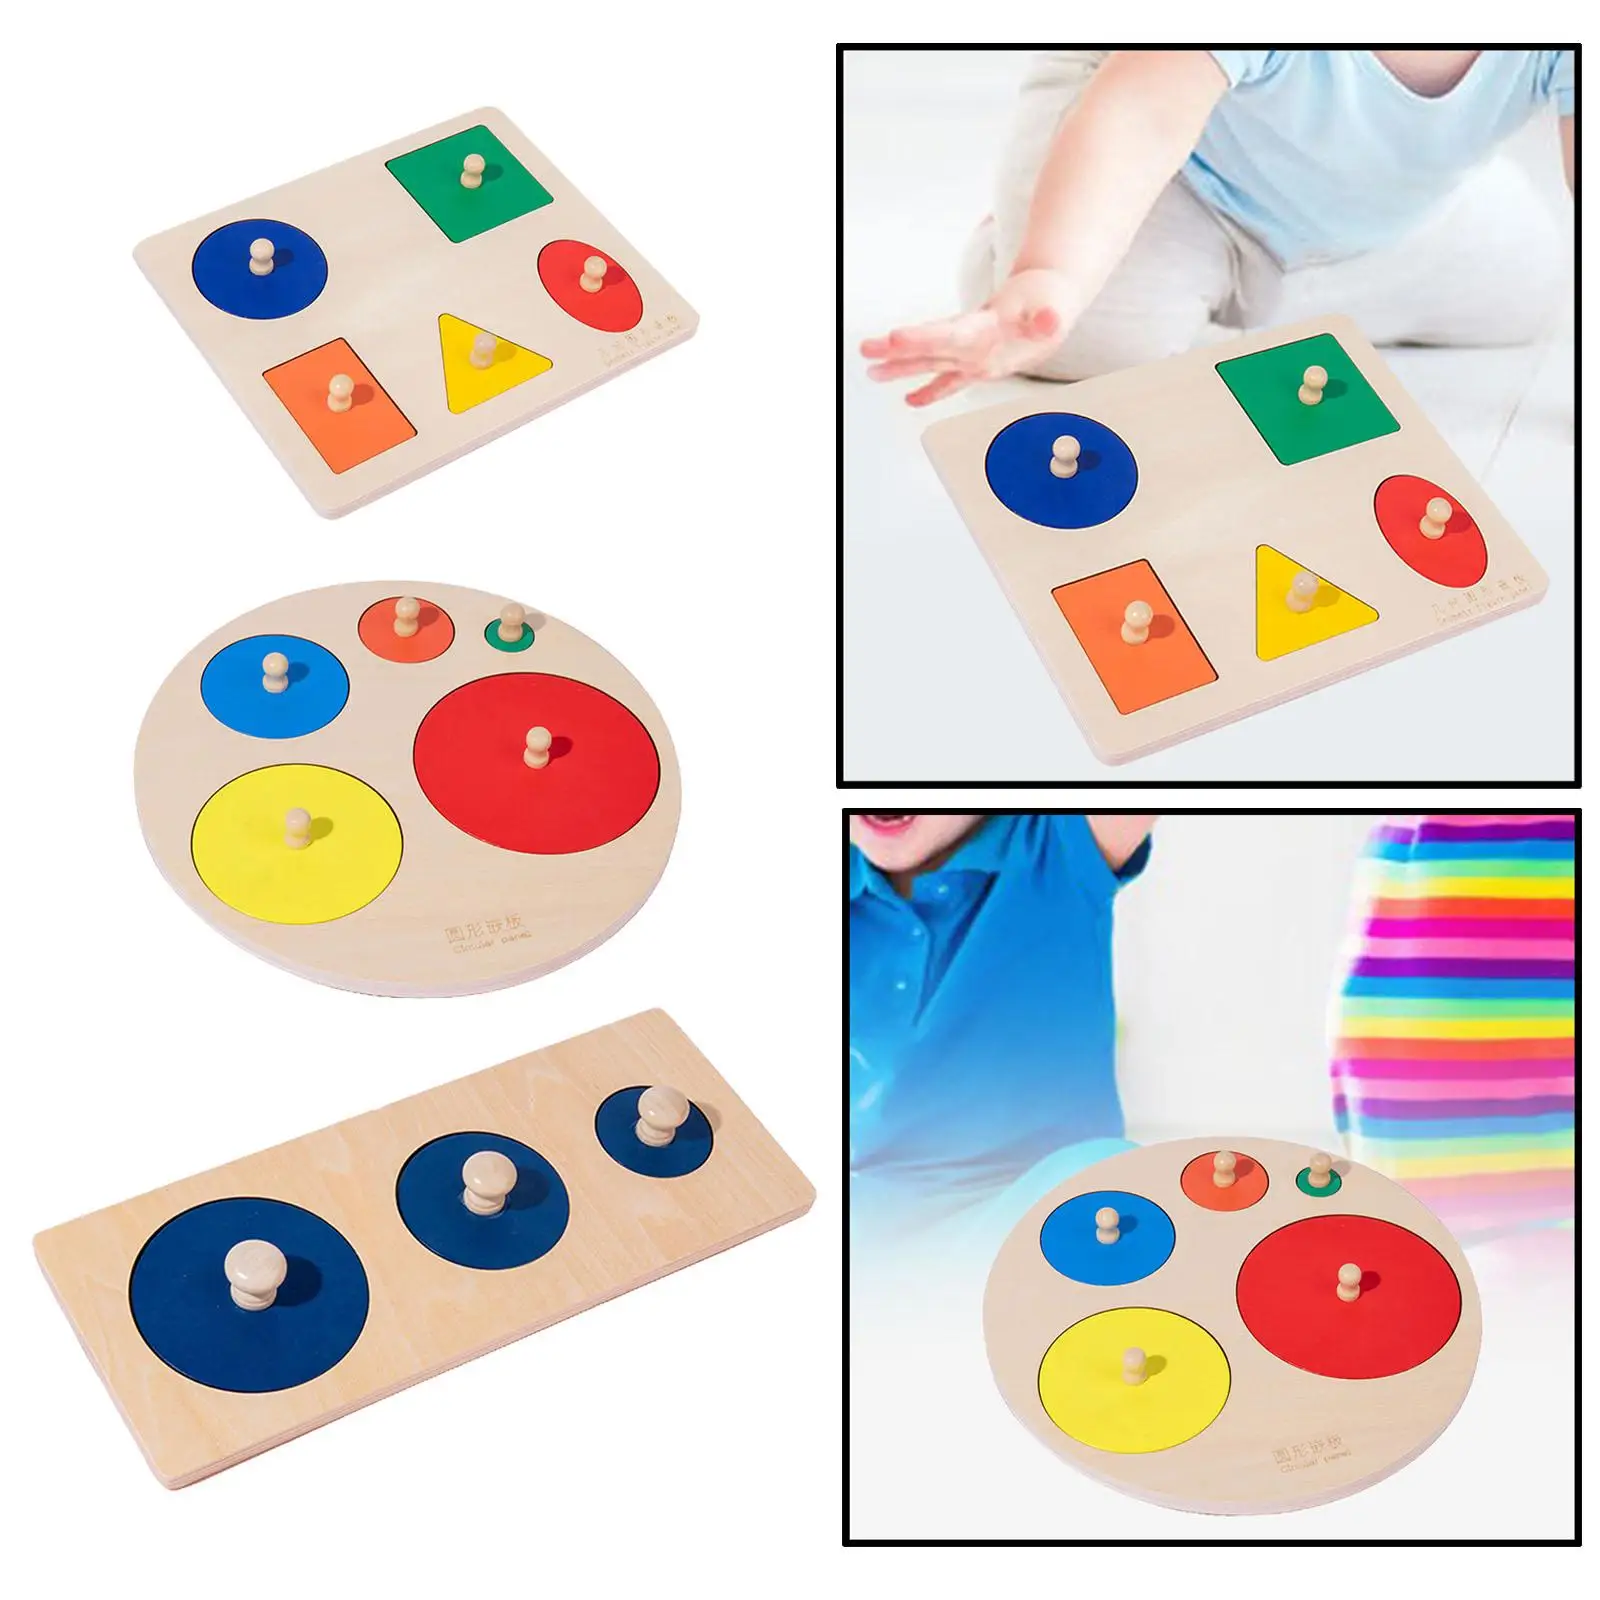 Grasp Board Preschool Learning Educational Material Sensorial Toy Early Learning Wood Knob Puzzle Peg Board for Early Education